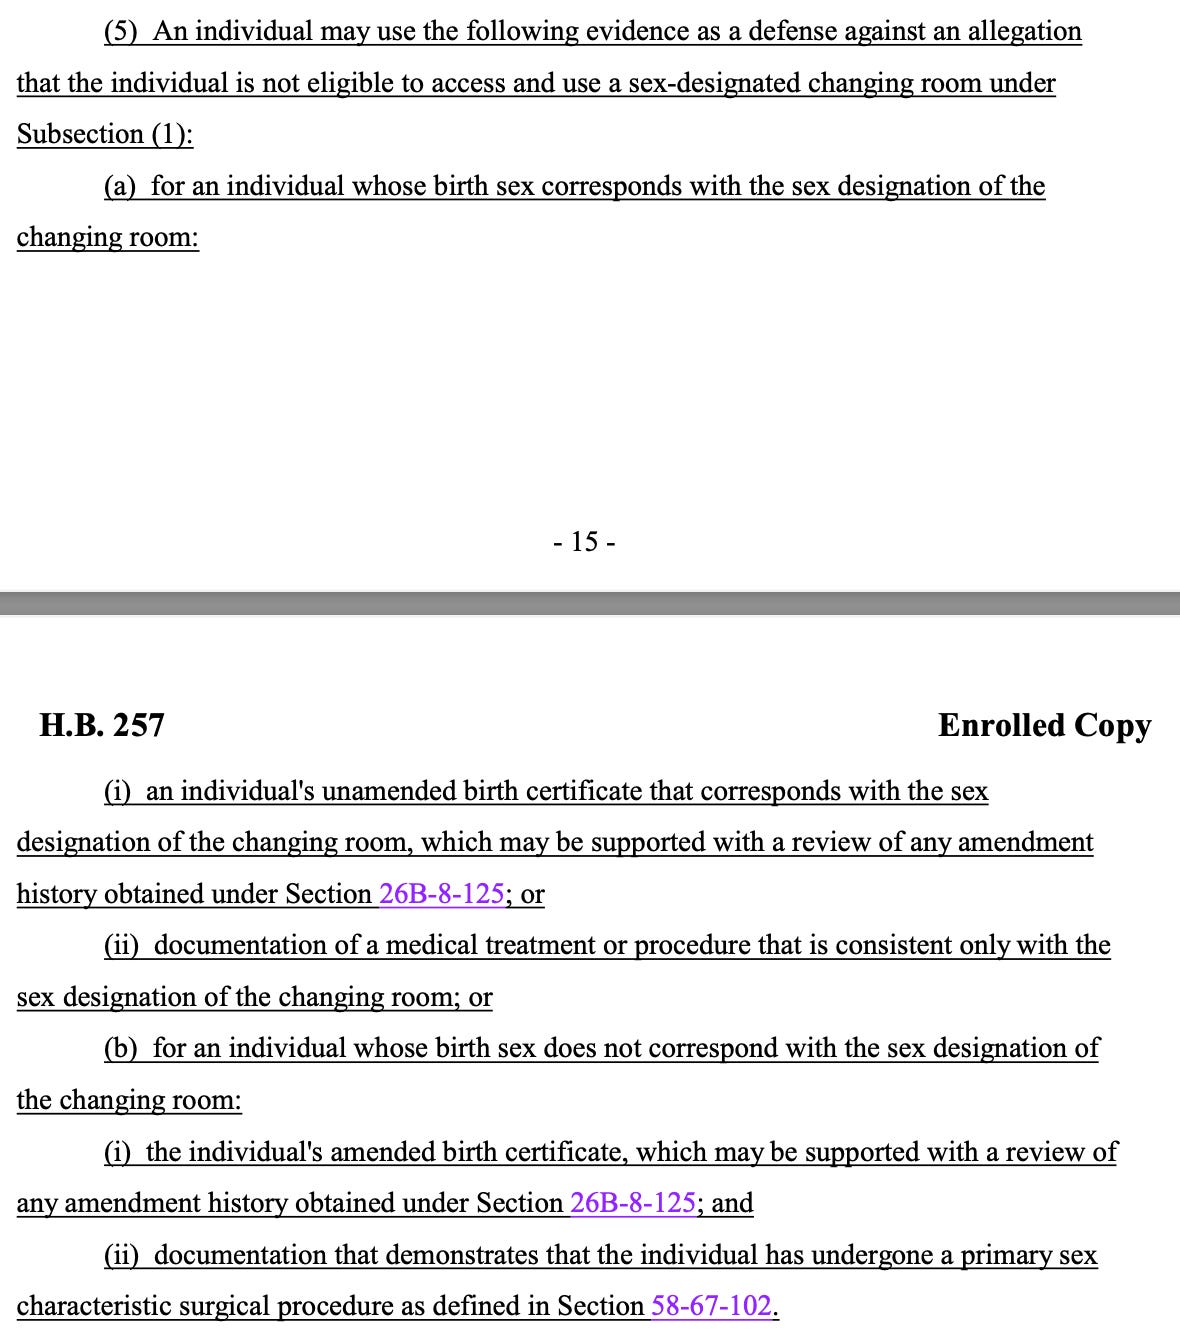 (5) An individual may use the following evidence as a defense against an allegation that the individual is not eligible to access and use a sex-designated changing room under Subsection (1): (a) for an individual whose birth sex corresponds with the sex designation of the changing room: (i) an individual's unamended birth certificate that corresponds with the sex 423 designation of the changing room, which may be supported with a review of any amendment 424 history obtained under Section 26B-8-125; or 425 (ii) documentation of a medical treatment or procedure that is consistent only with the 426 sex designation of the changing room; or 427 (b) for an individual whose birth sex does not correspond with the sex designation of 428 the changing room: 429 (i) the individual's amended birth certificate, which may be supported with a review of 430 any amendment history obtained under Section 26B-8-125; and 431 (ii) documentation that demonstrates that the individual has undergone a primary sex 432 characteristic surgical procedure as defined in Section 58-67-102.